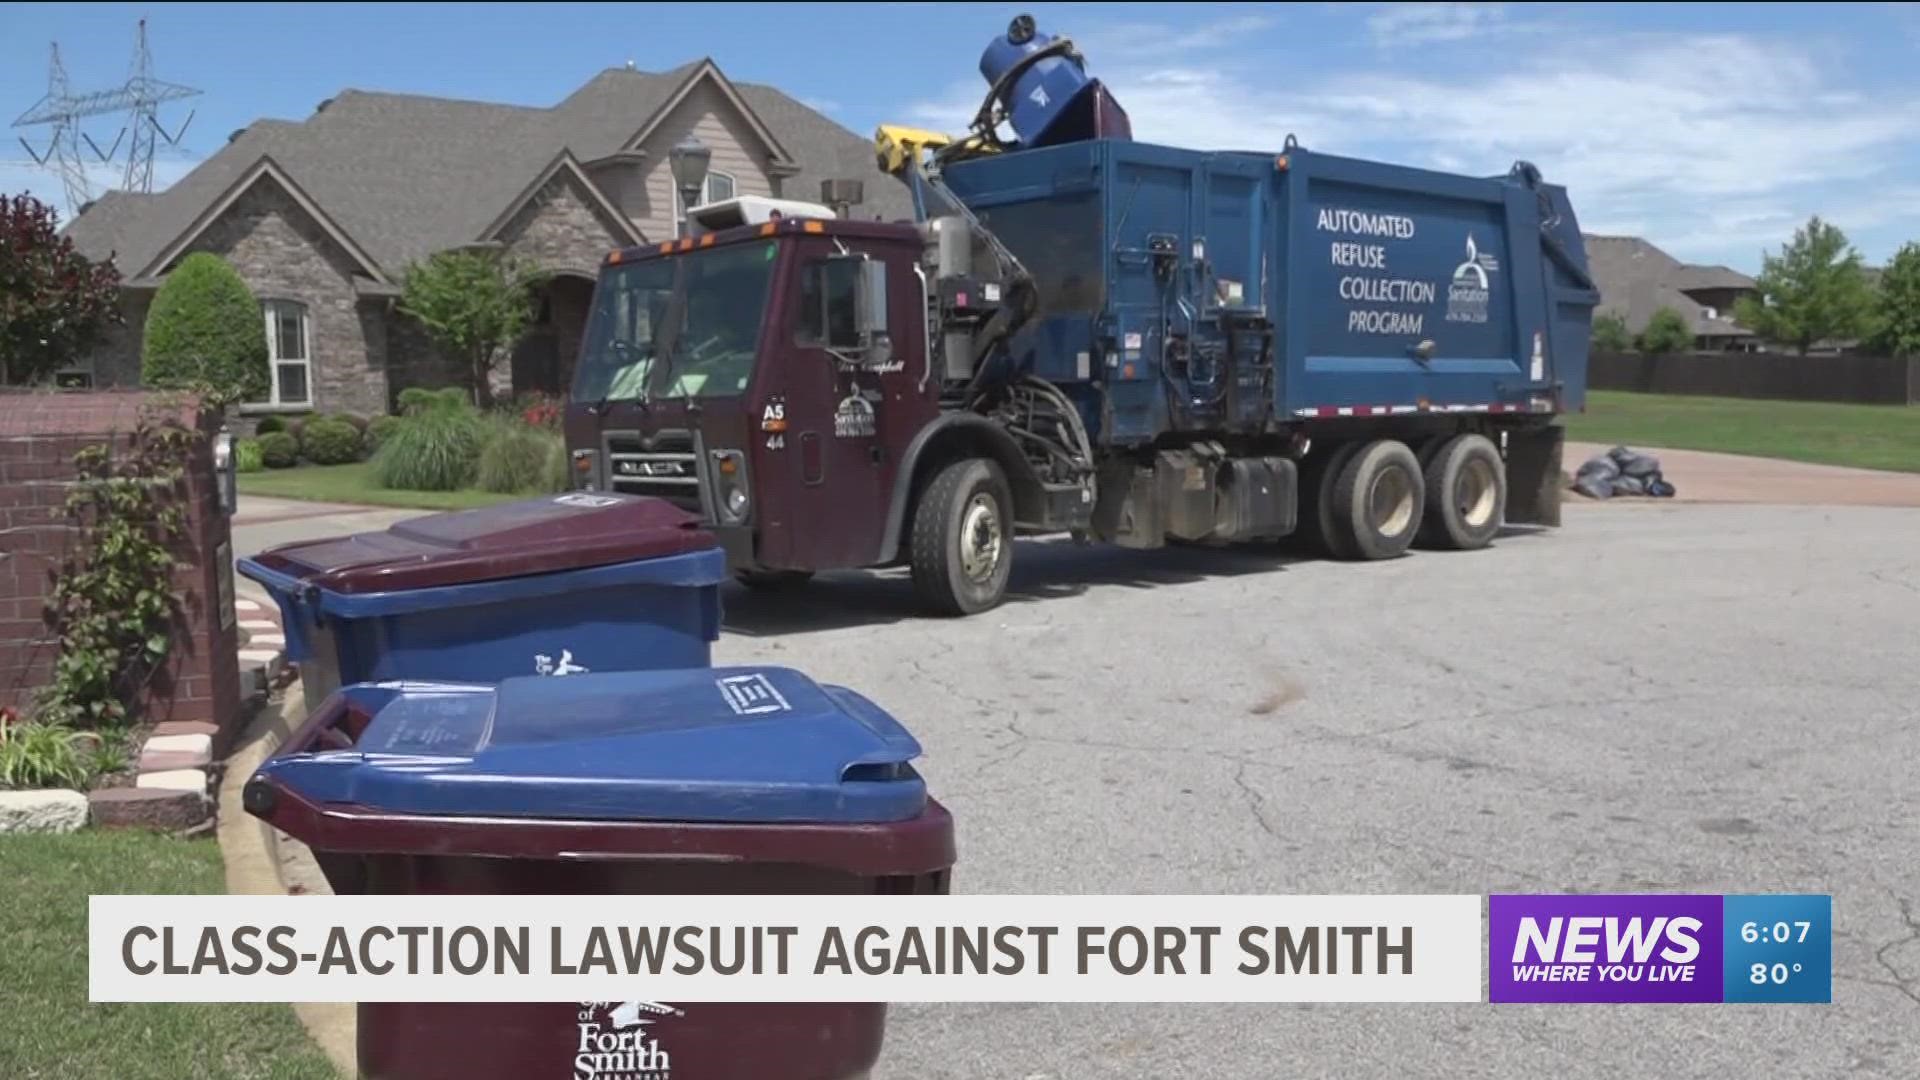 Lawyers for residents who filed the civil suit say they are wanting compensation for the money Fort Smith used for "pretending to recycle."